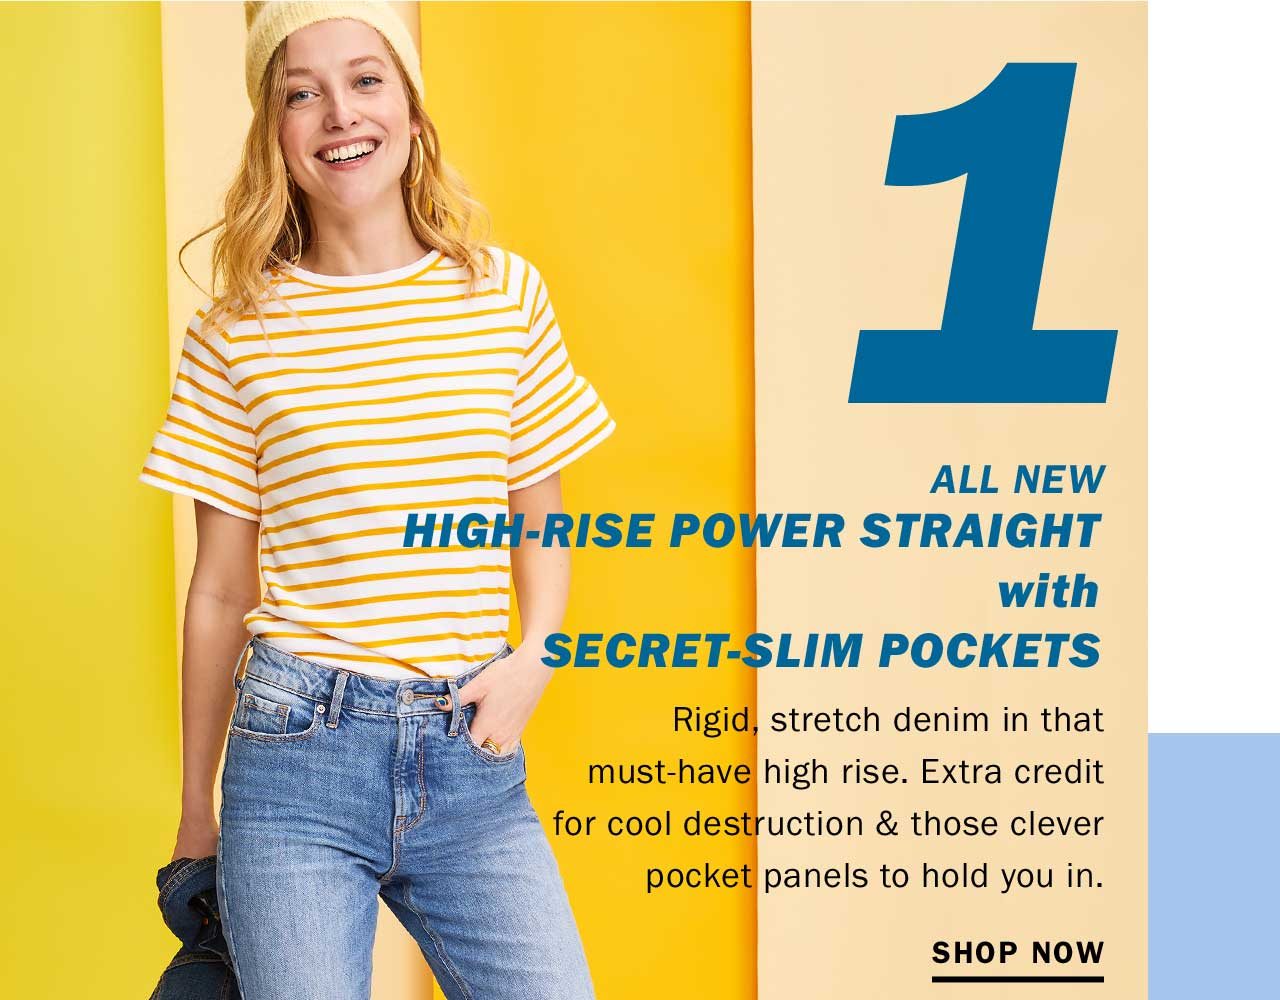 All new high-rise power staright